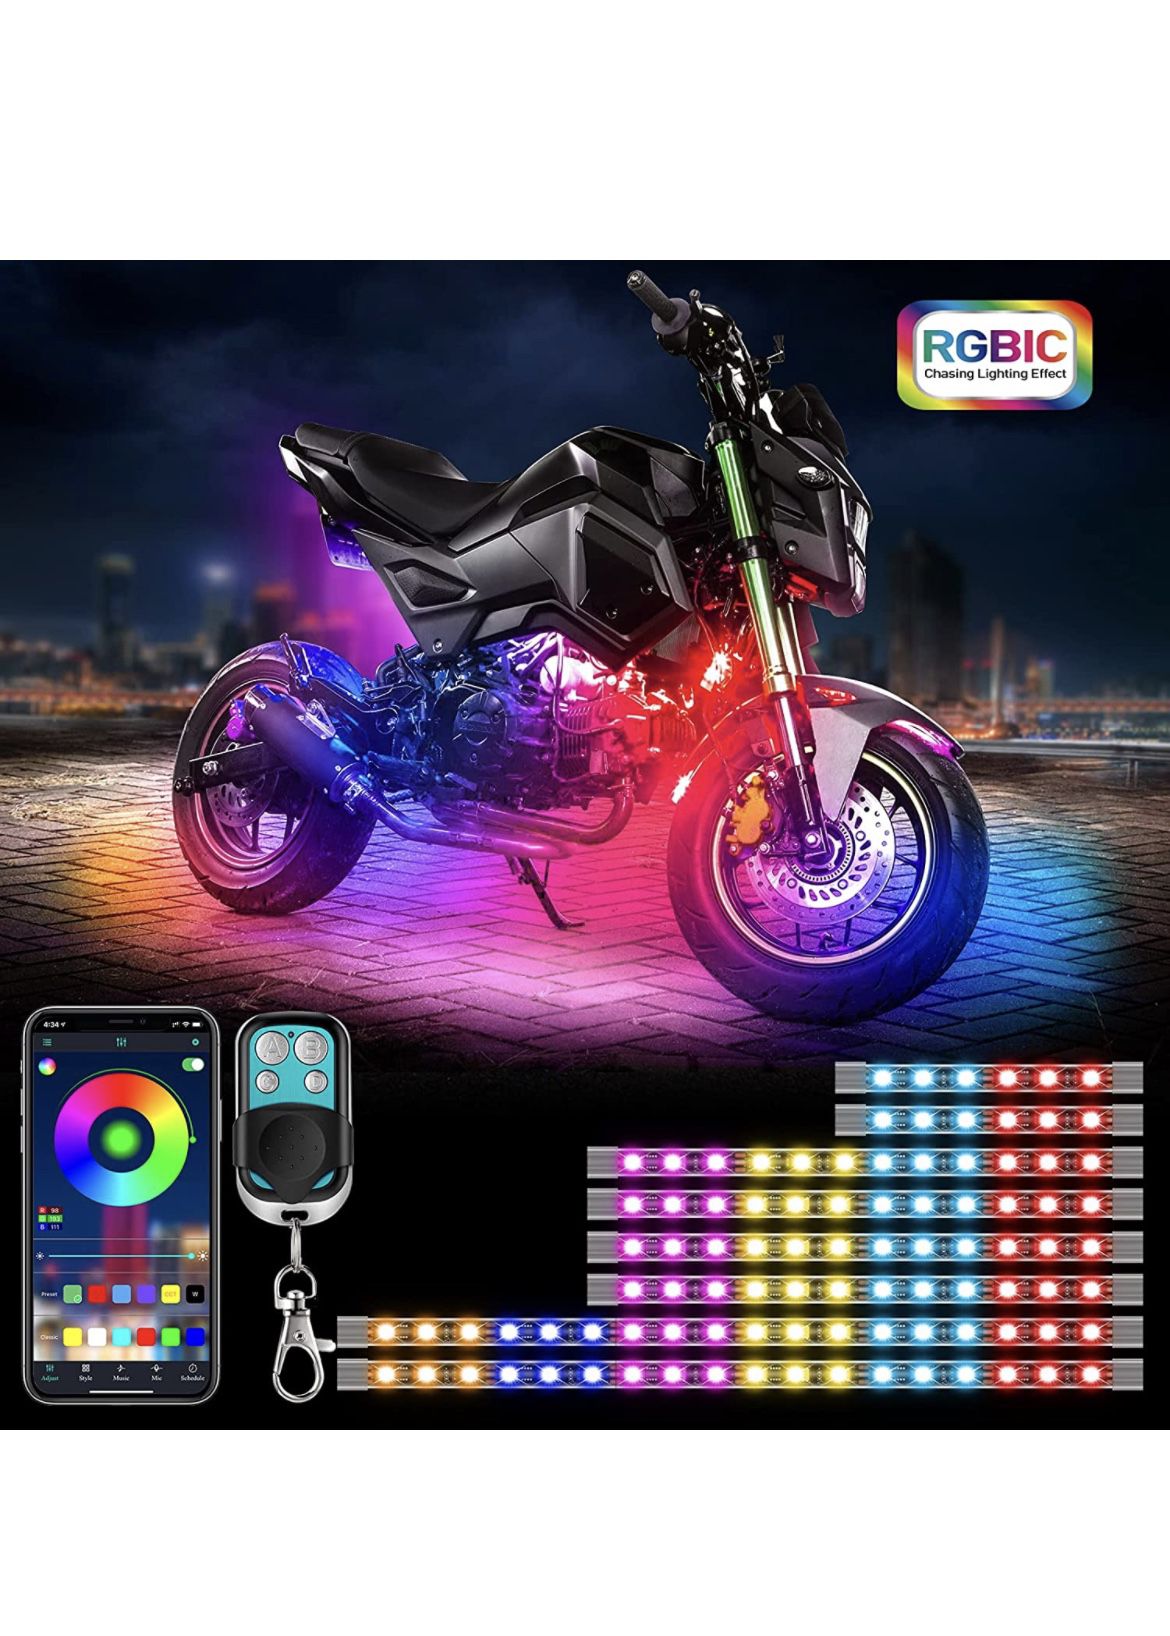 Motorcycle LED Light Kit, Ropelux Upgraded Dreamcolor RGBIC Motorcycle Led Lights App with 4-Key RF Remote Control DIY 16 Million Colors Brake Light S